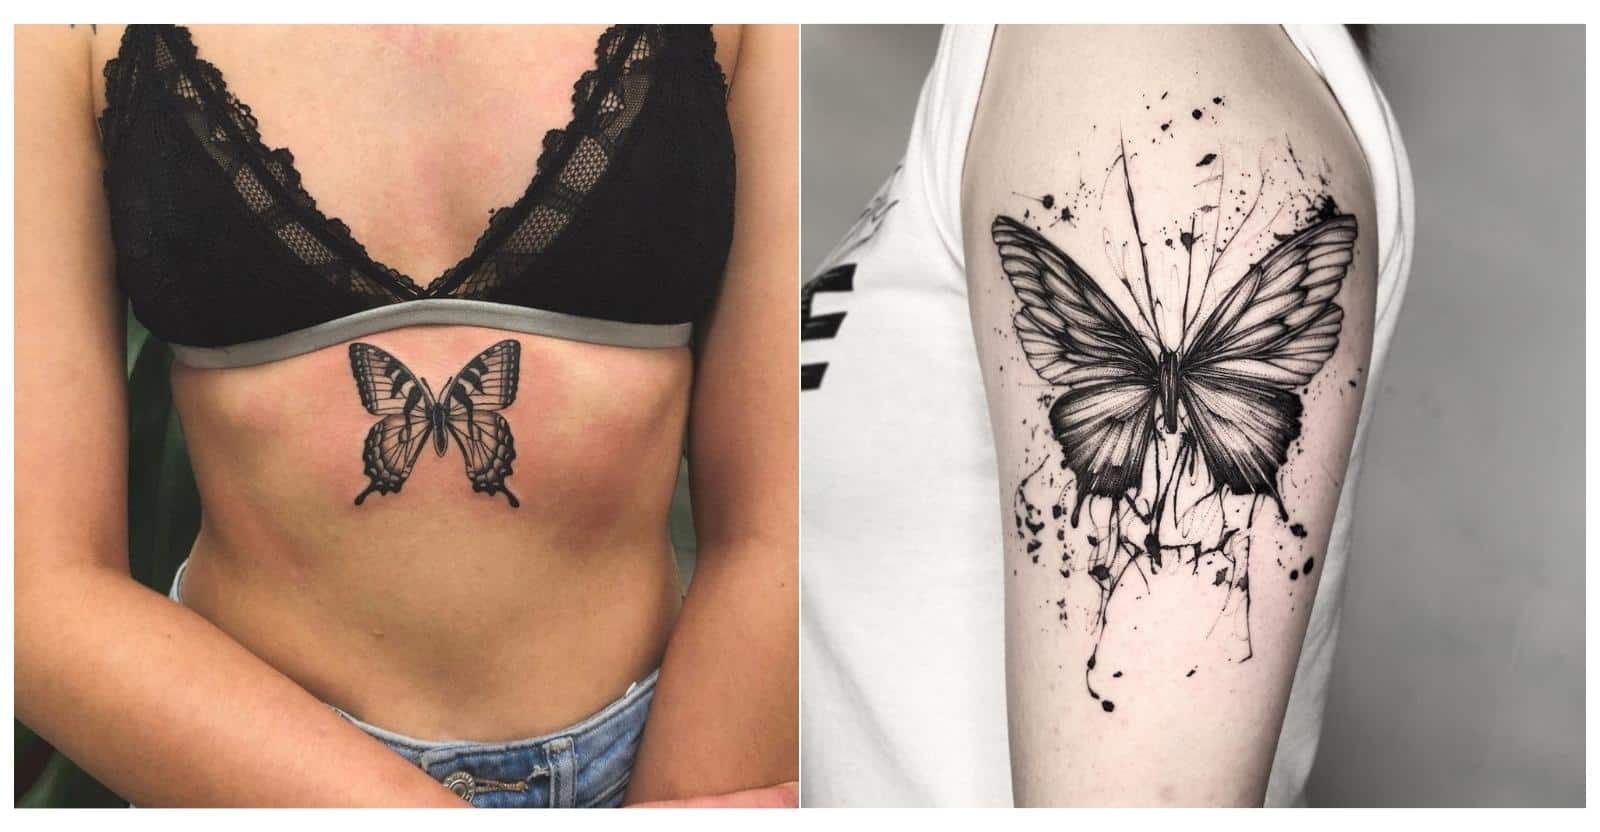 butterfly tattoos